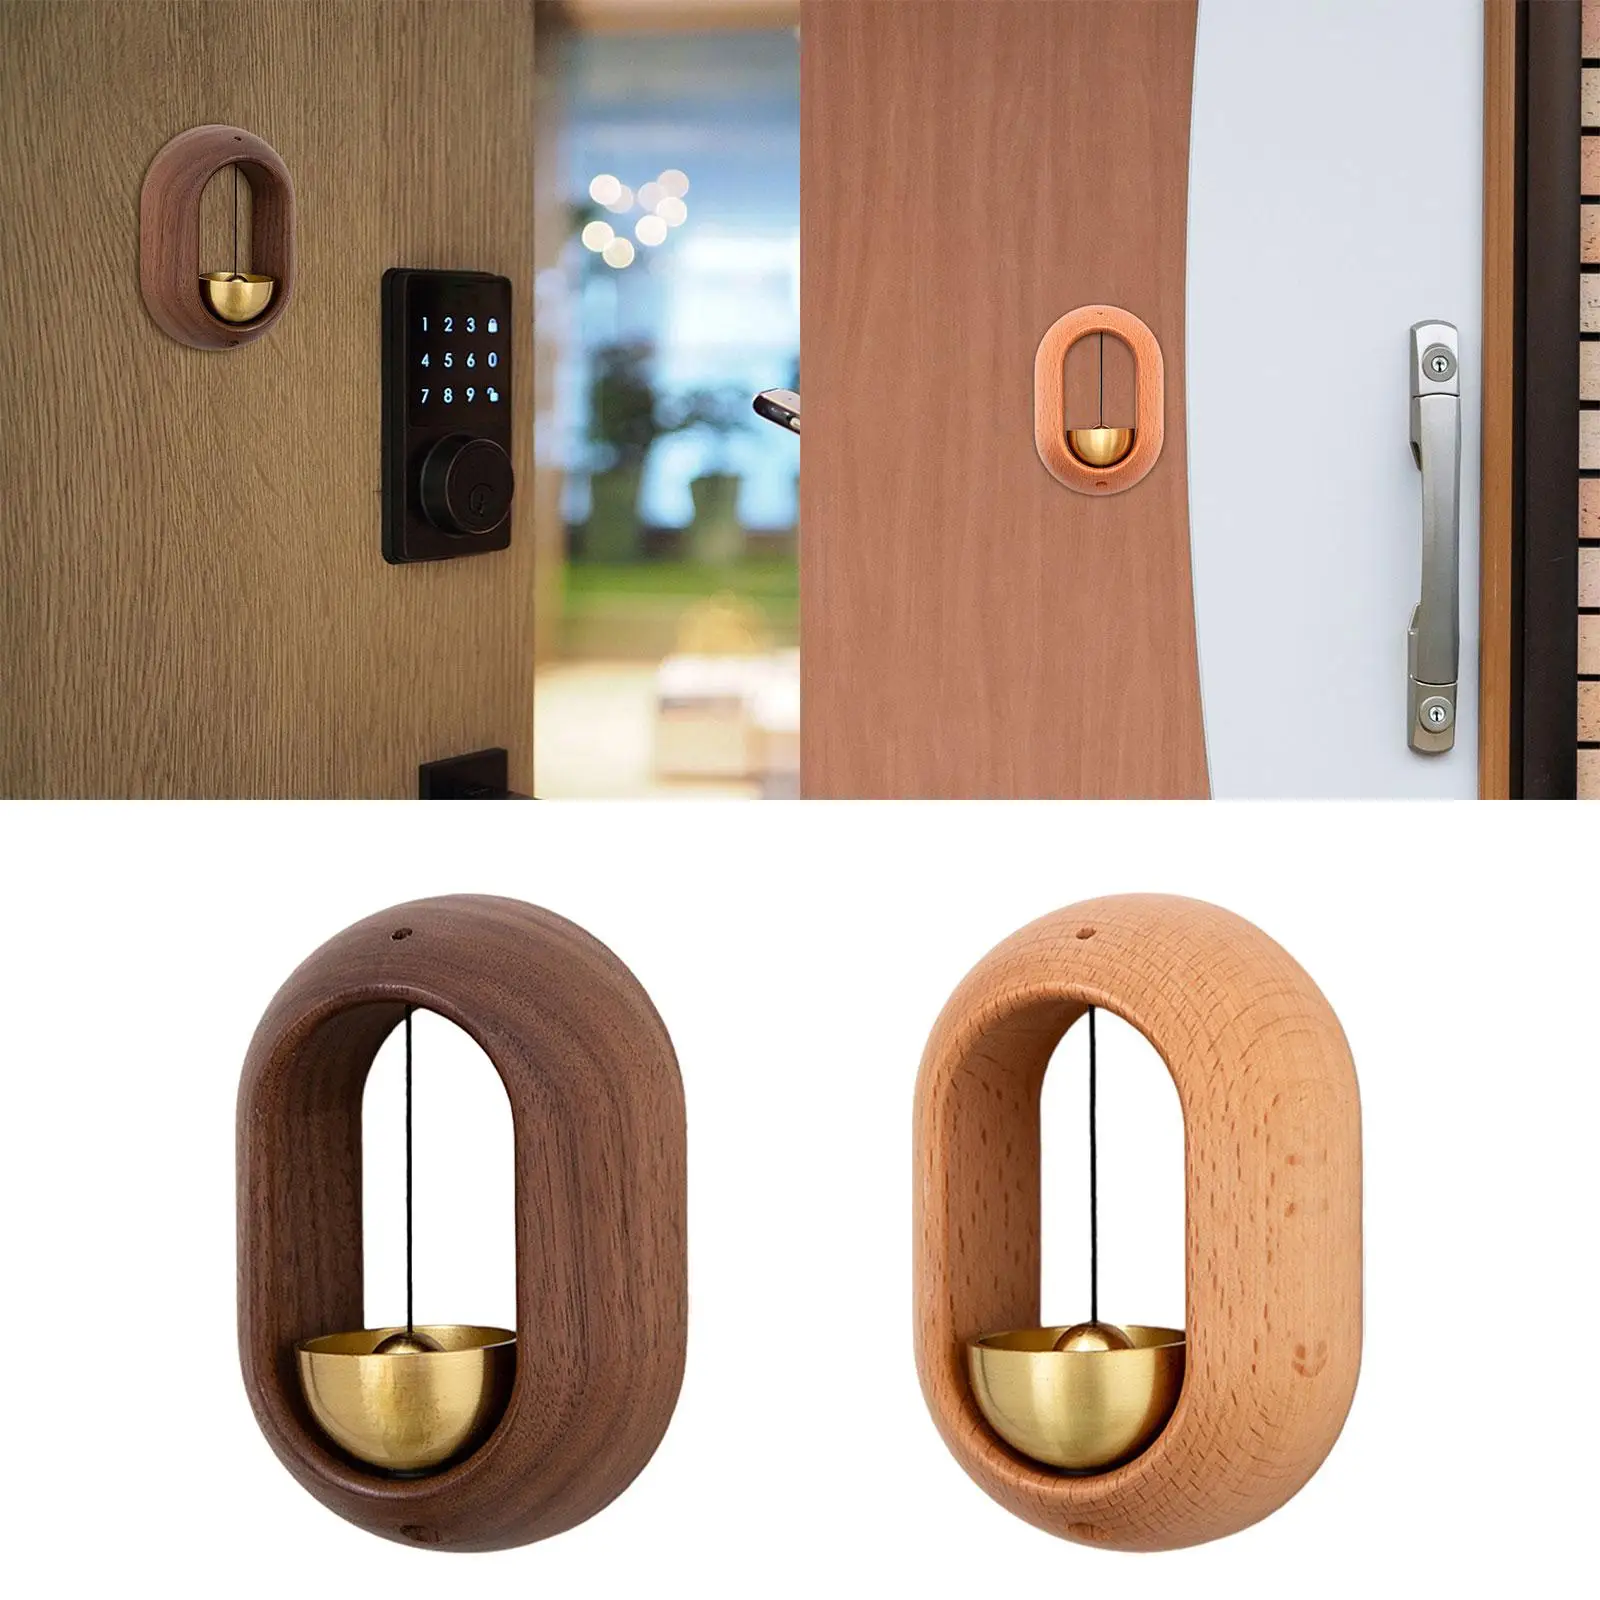 Shopkeepers Bell Japanese Style Wood Lightweight Unique Bell Ornament Doorbells for Barn Door Entrance Business Office